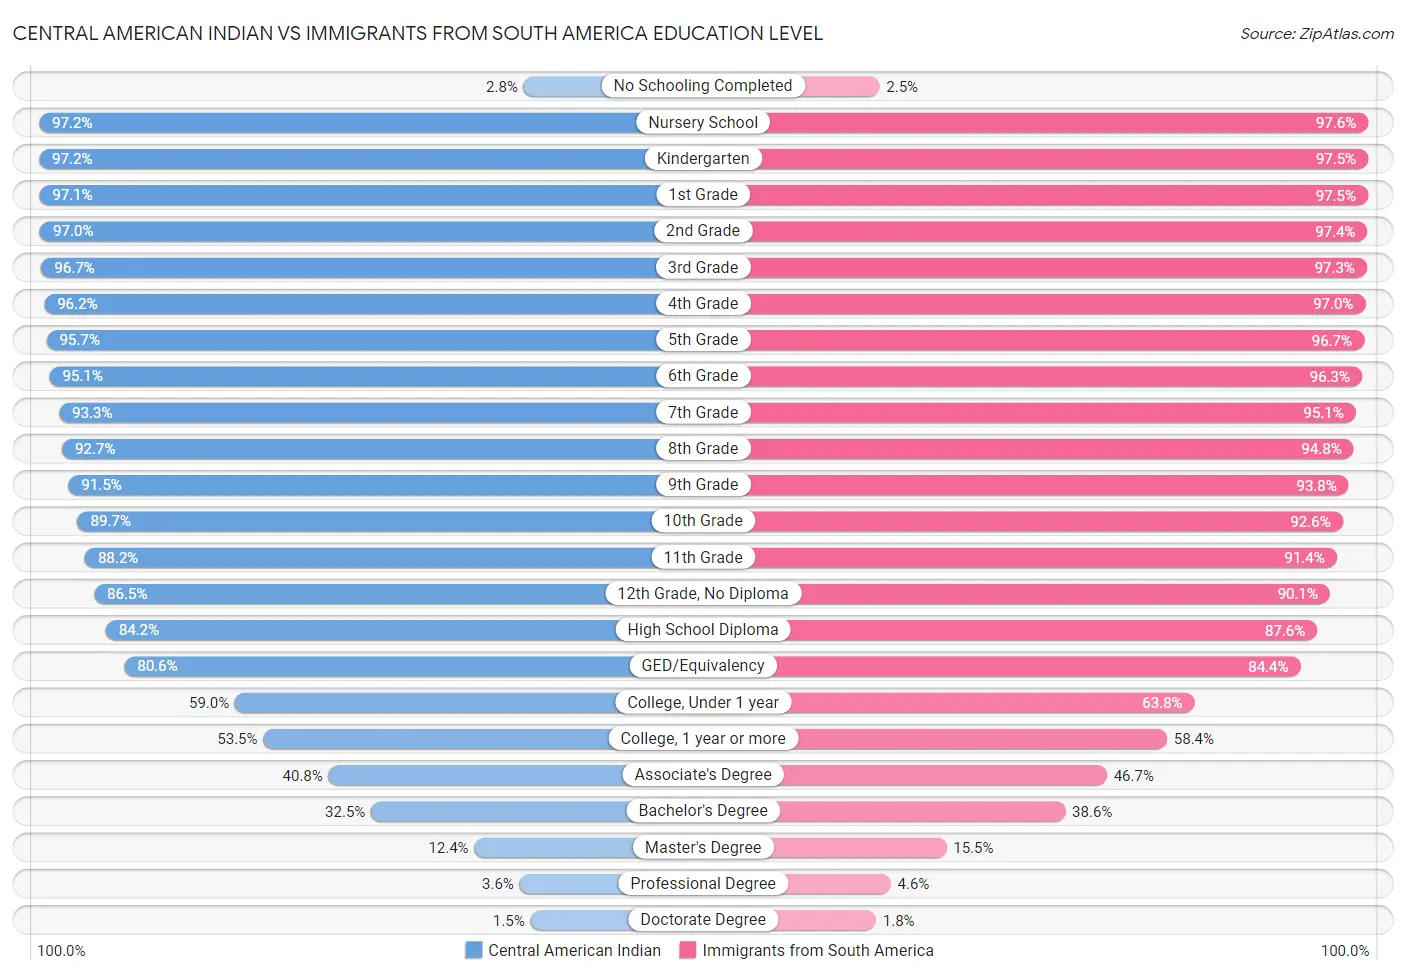 Central American Indian vs Immigrants from South America Education Level